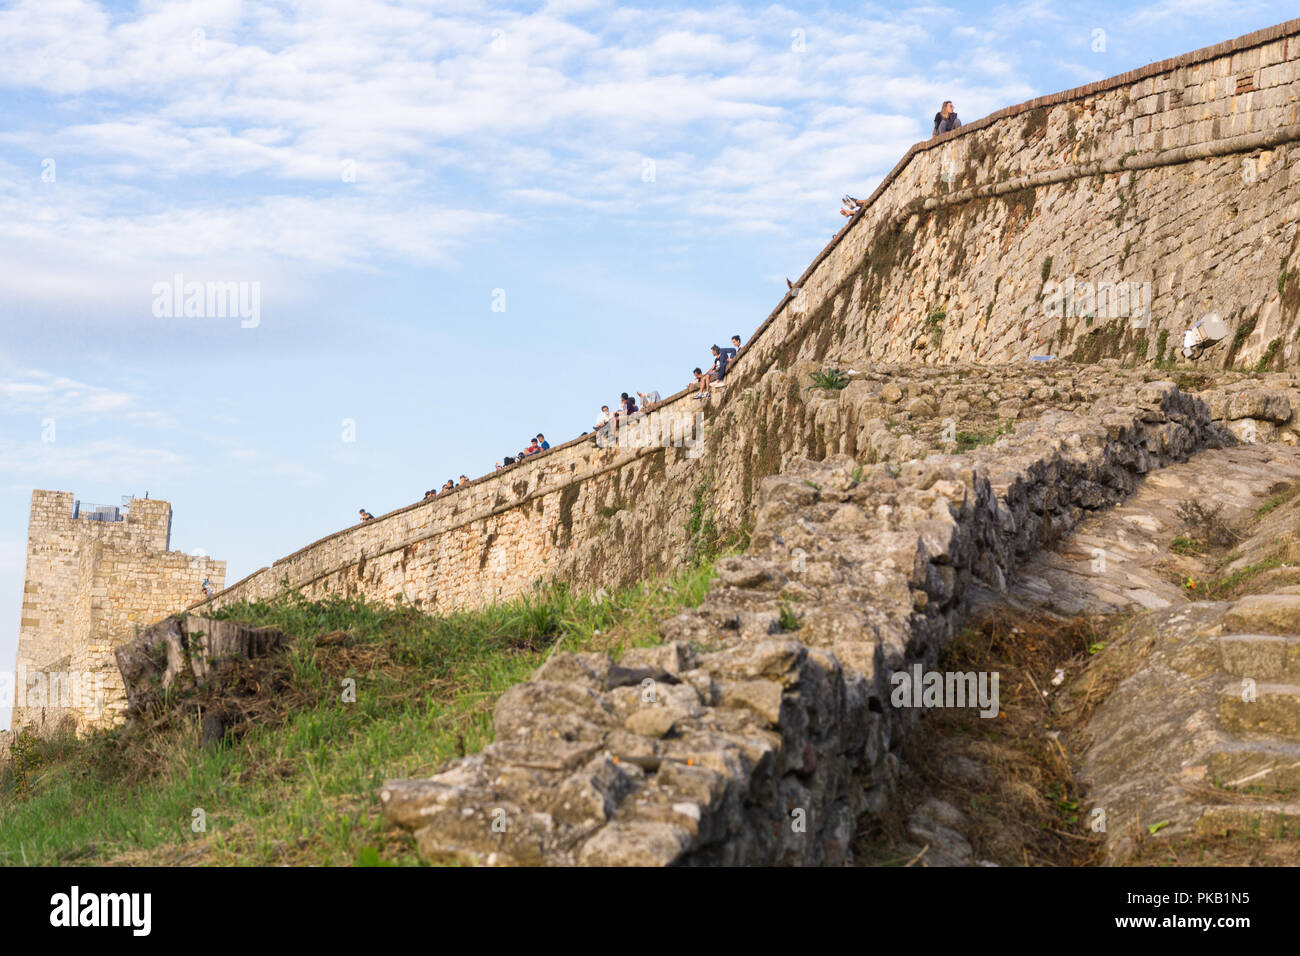 Outer wall of the Belgrade fortress Kalemegdan with tourists sitting along. Serbia. Stock Photo